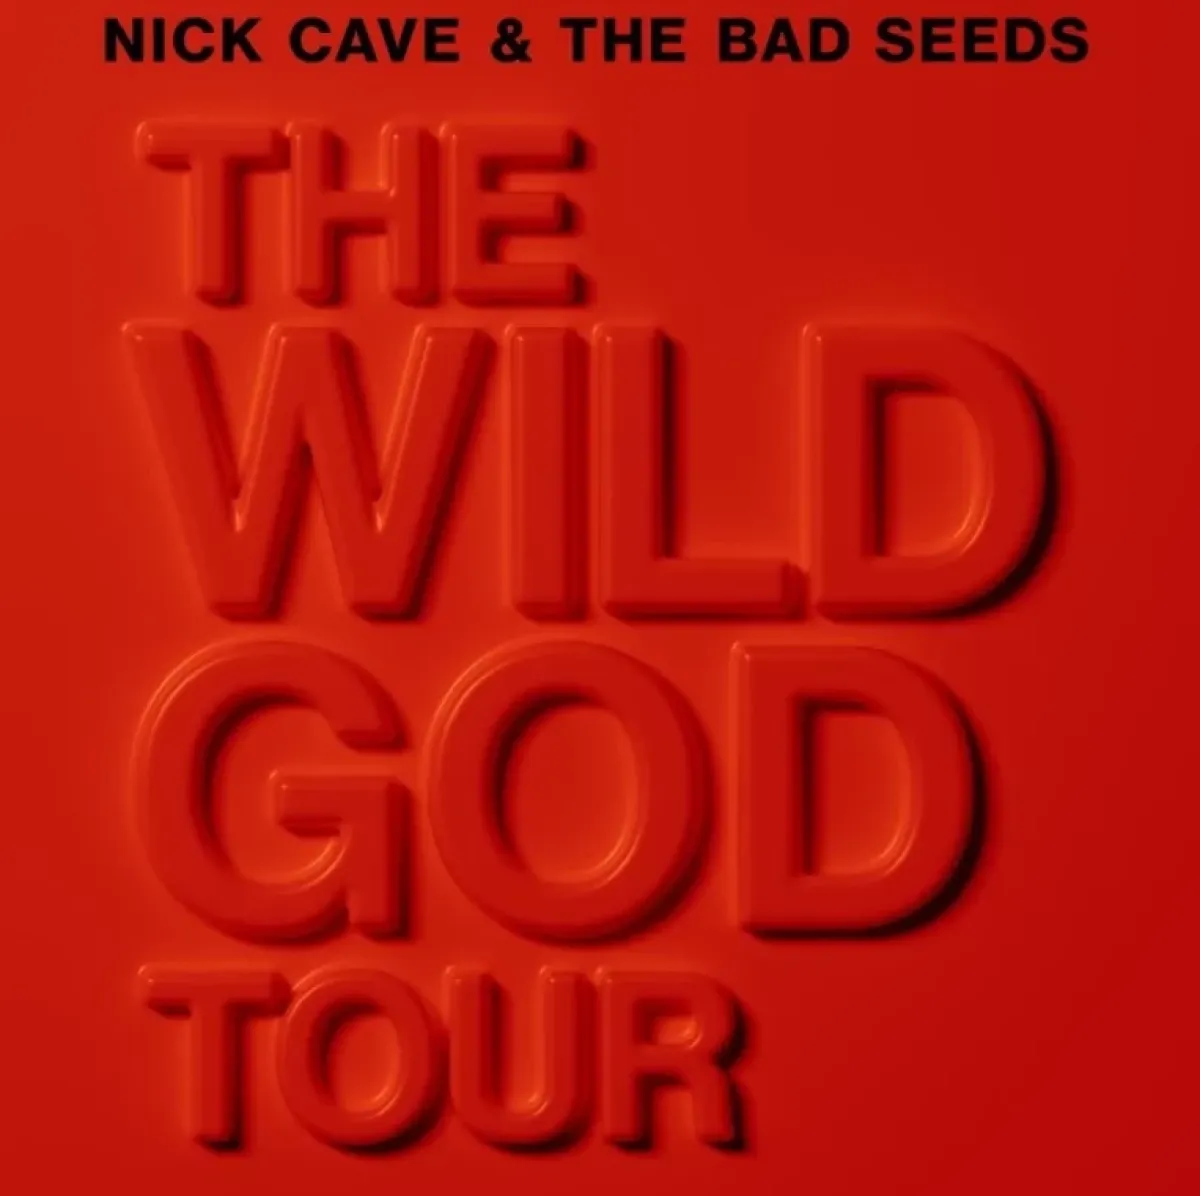 Nick Cave And The Bad Seeds in der The O2 Arena Tickets